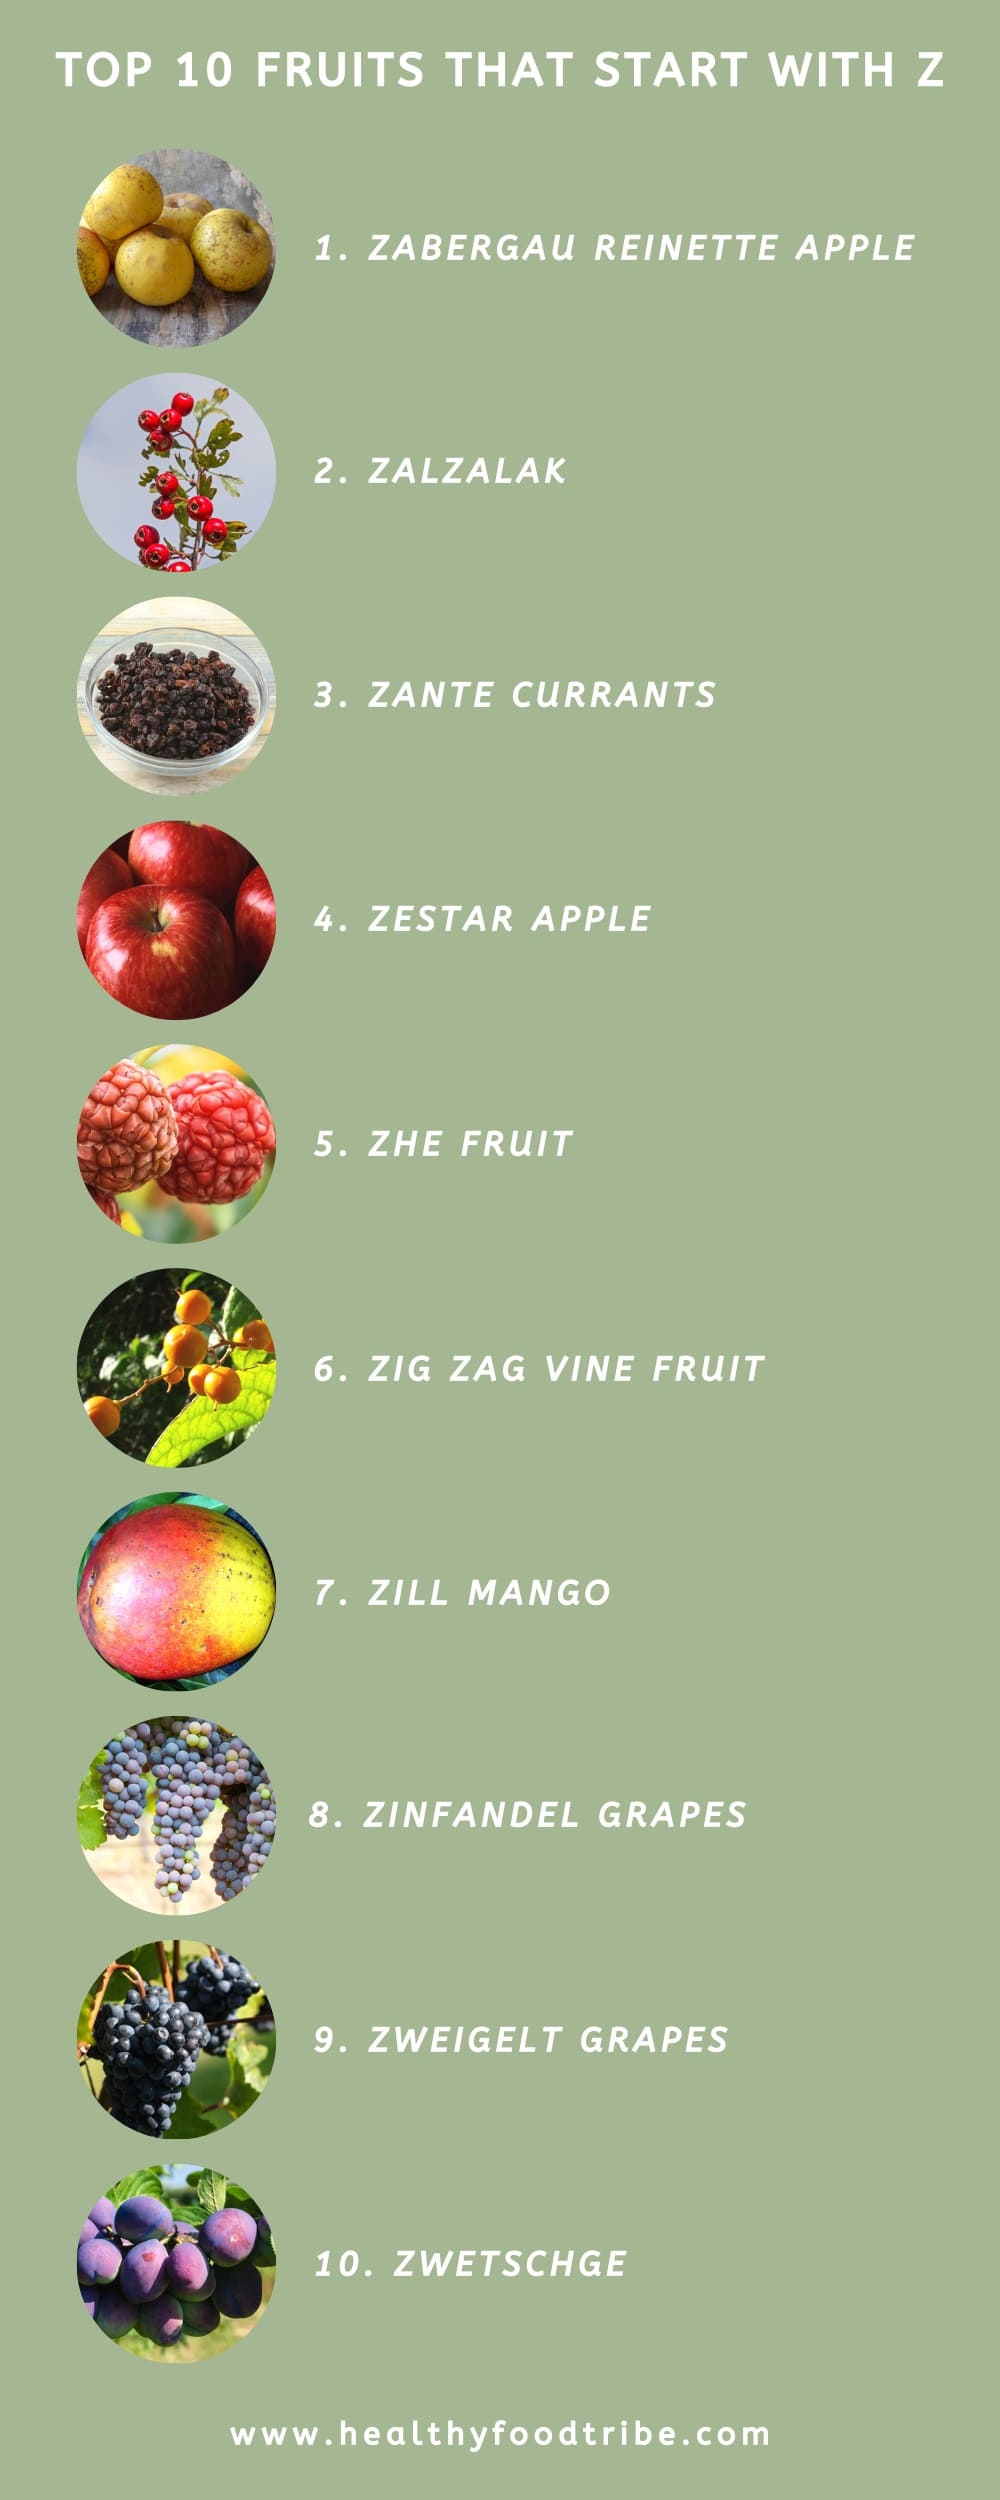 List of Z fruits